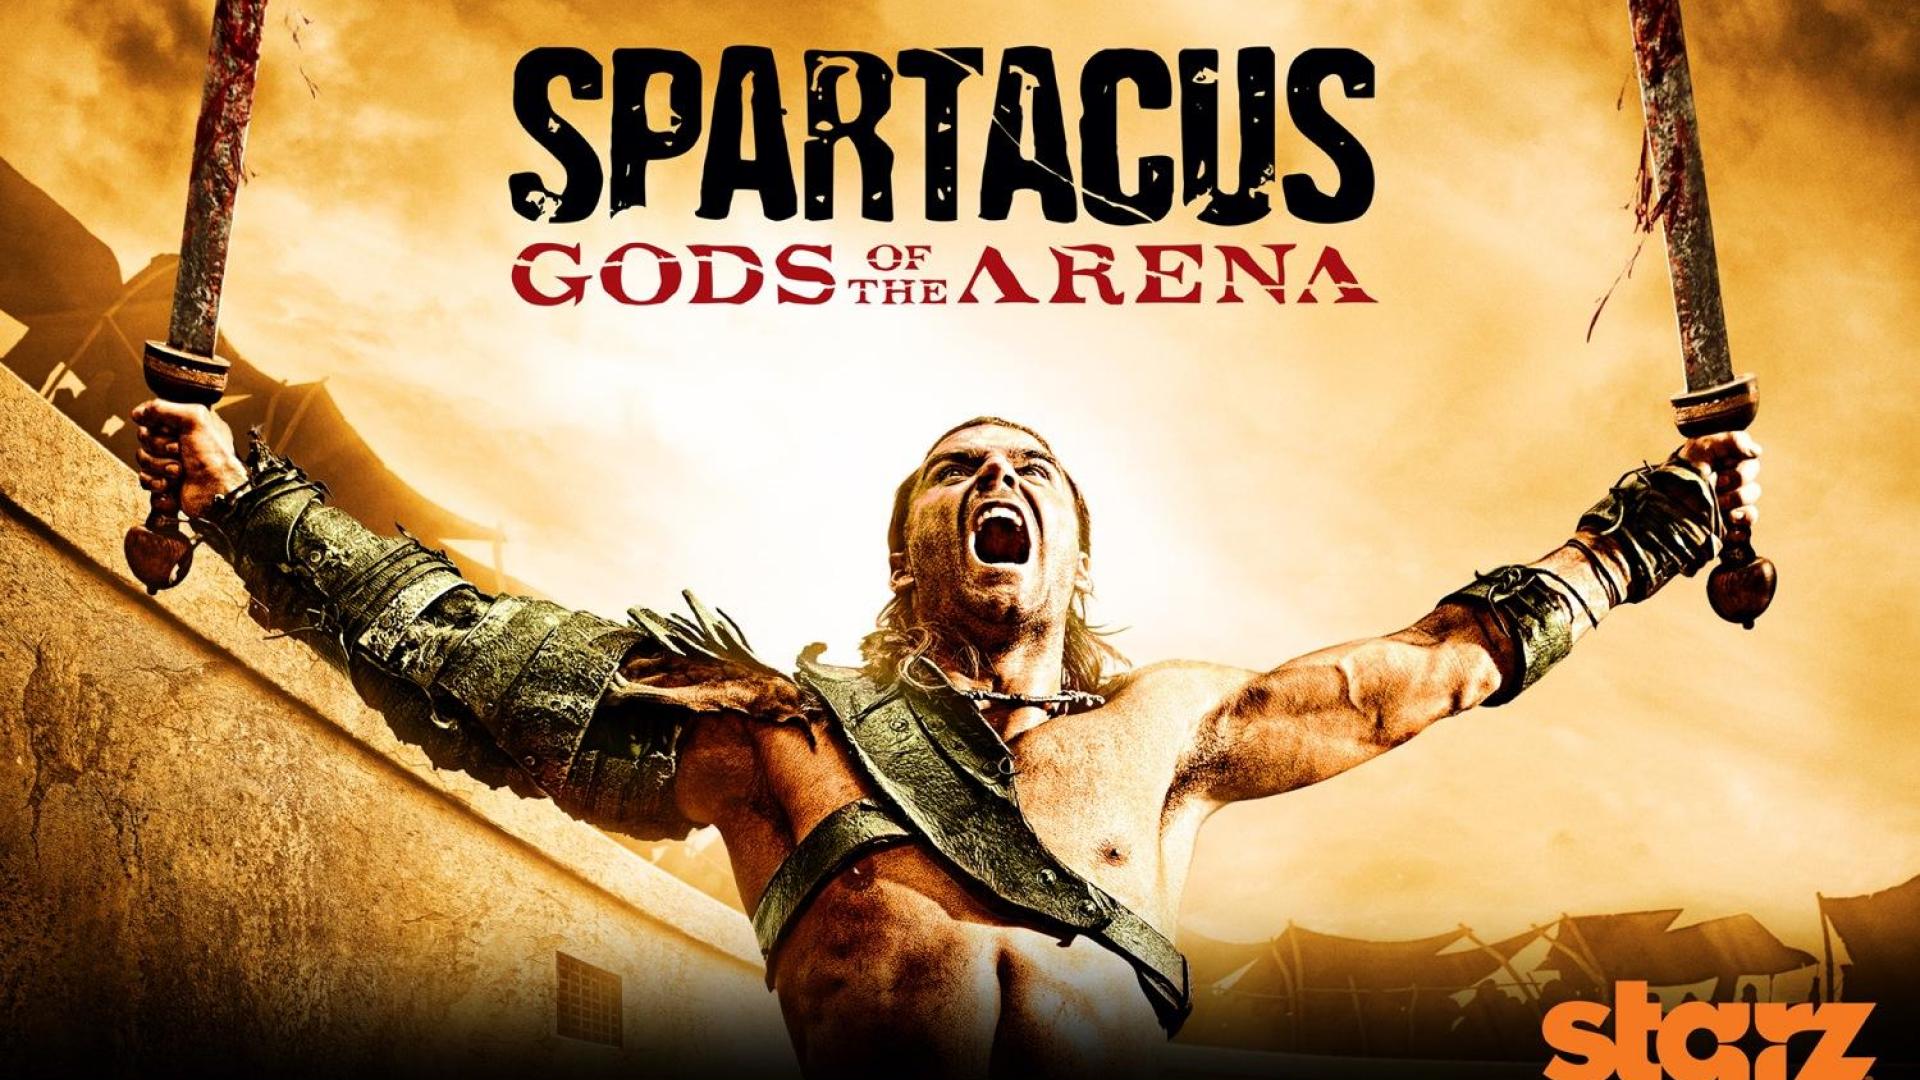 SPARTACUS GOD OF THE ARENA WALLPAPER - - HD Wallpapers